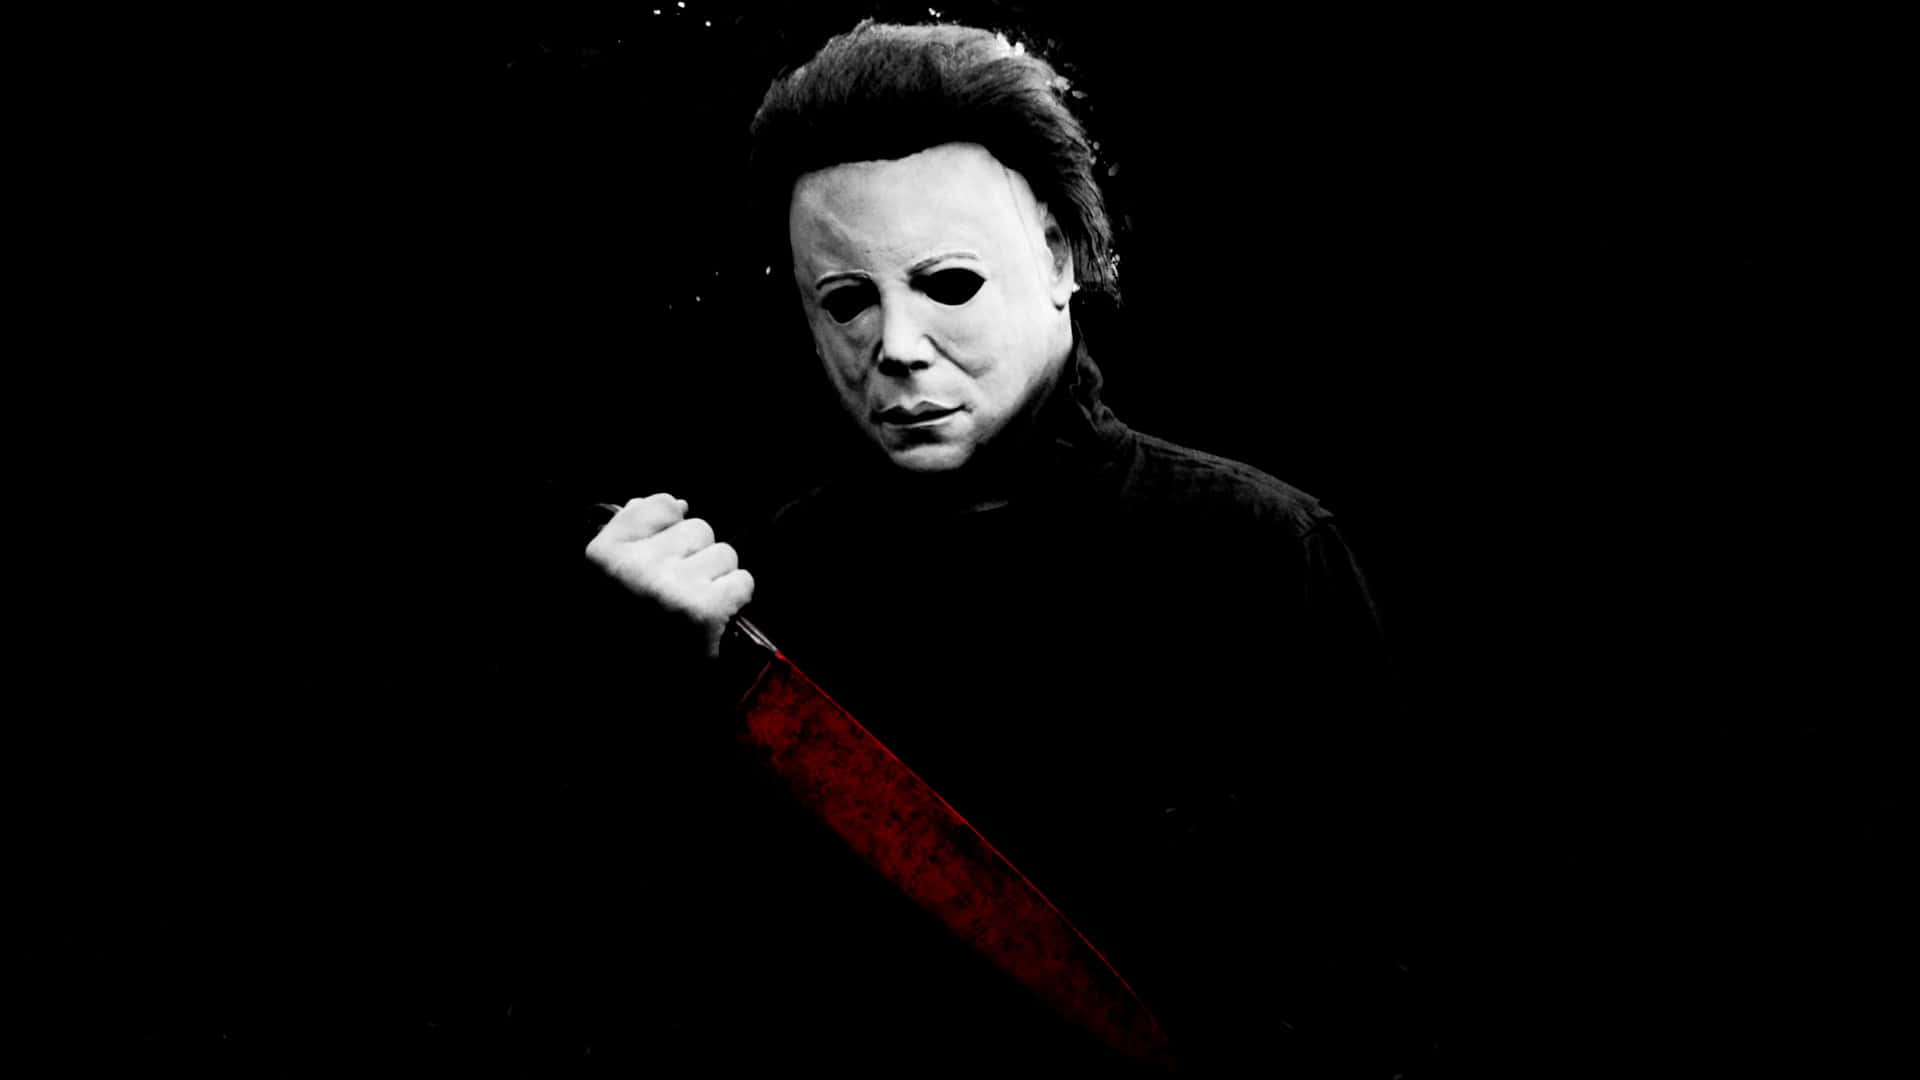 Mike Myers Eagerly Awaits His Next Role Wallpaper